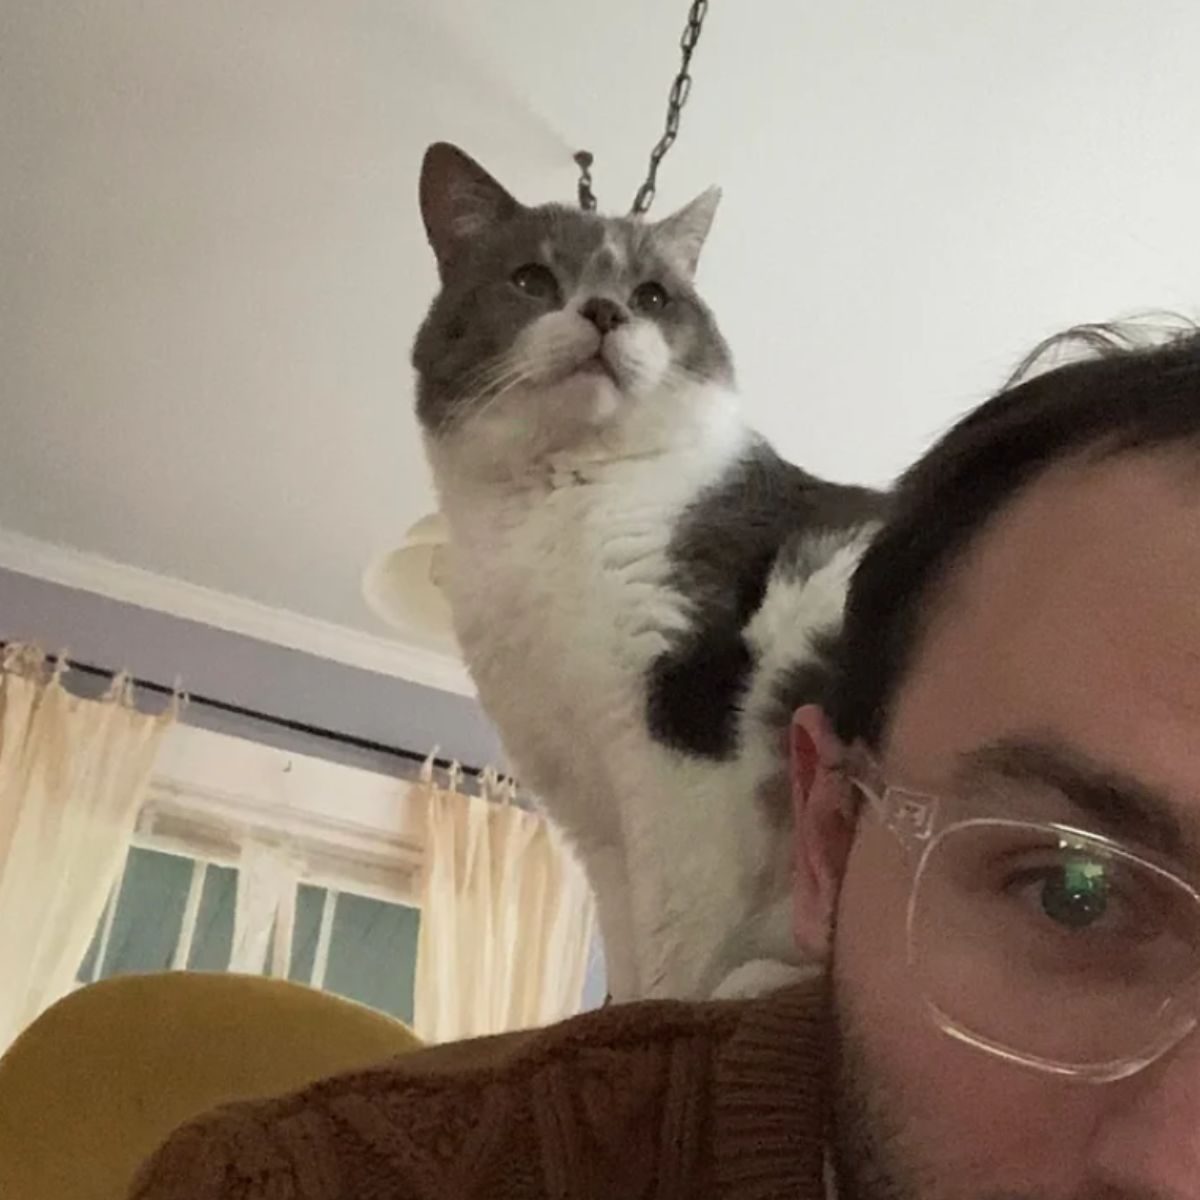 guy with glasses and cat